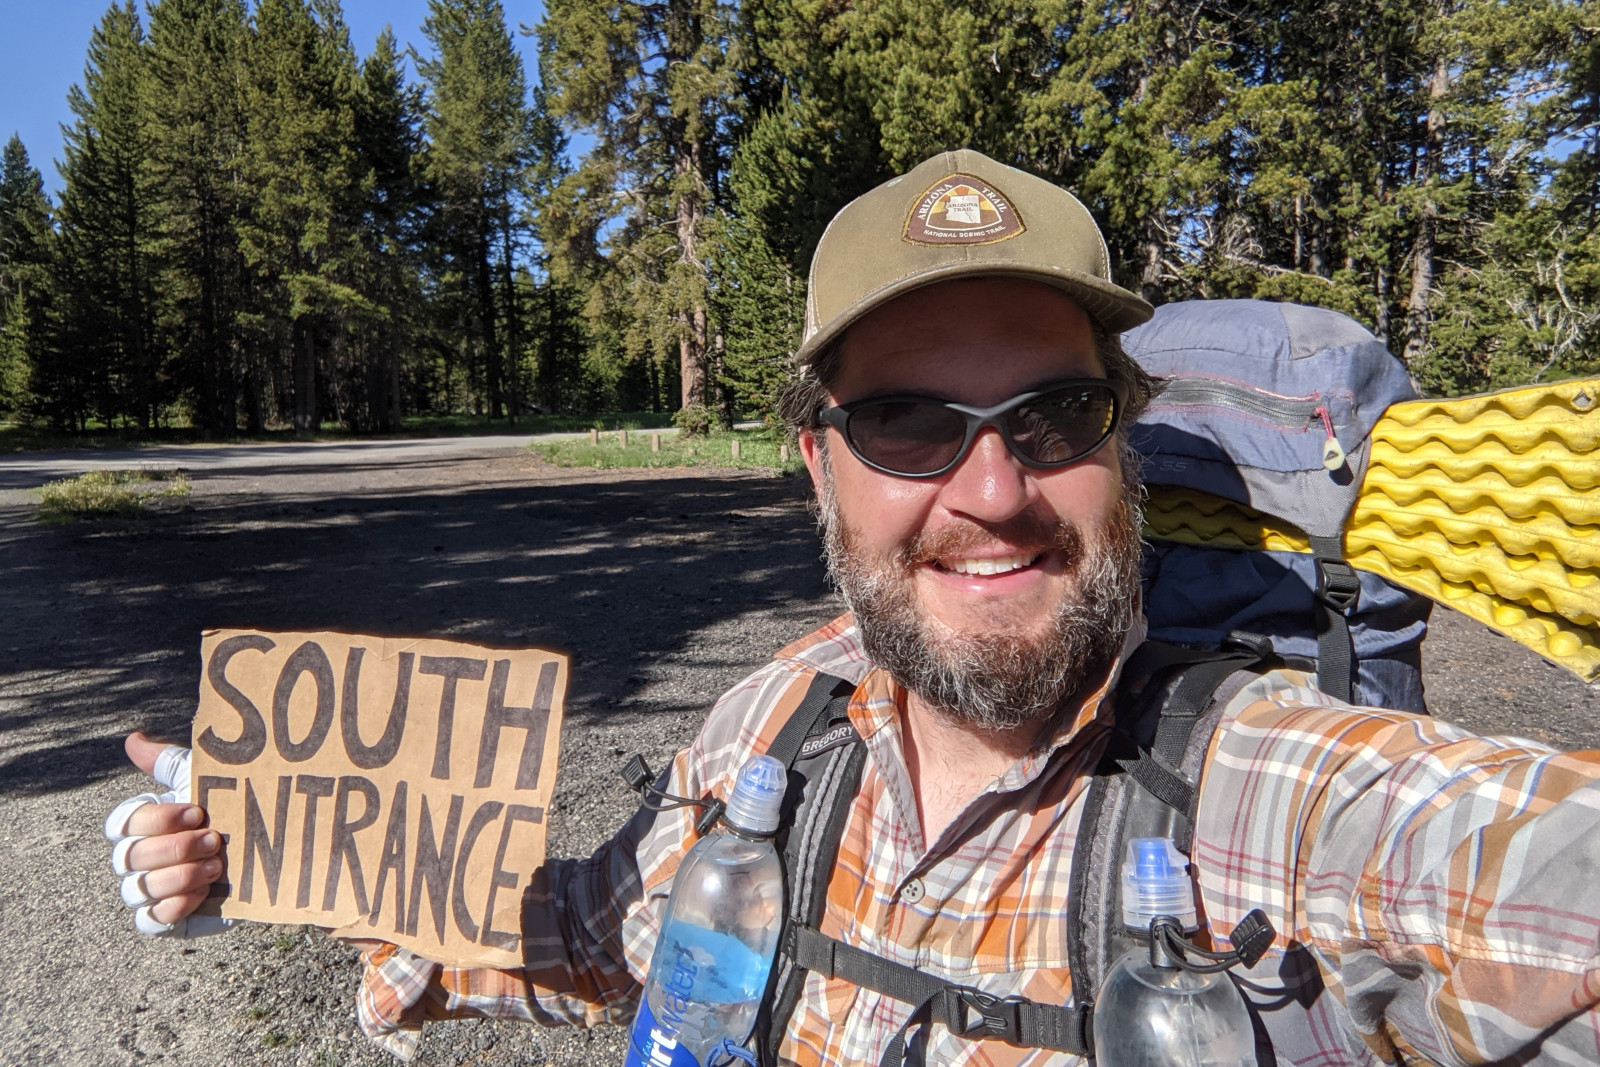 Justin holding a SOUTH ENTRANCE sign in preparation to hitchhike